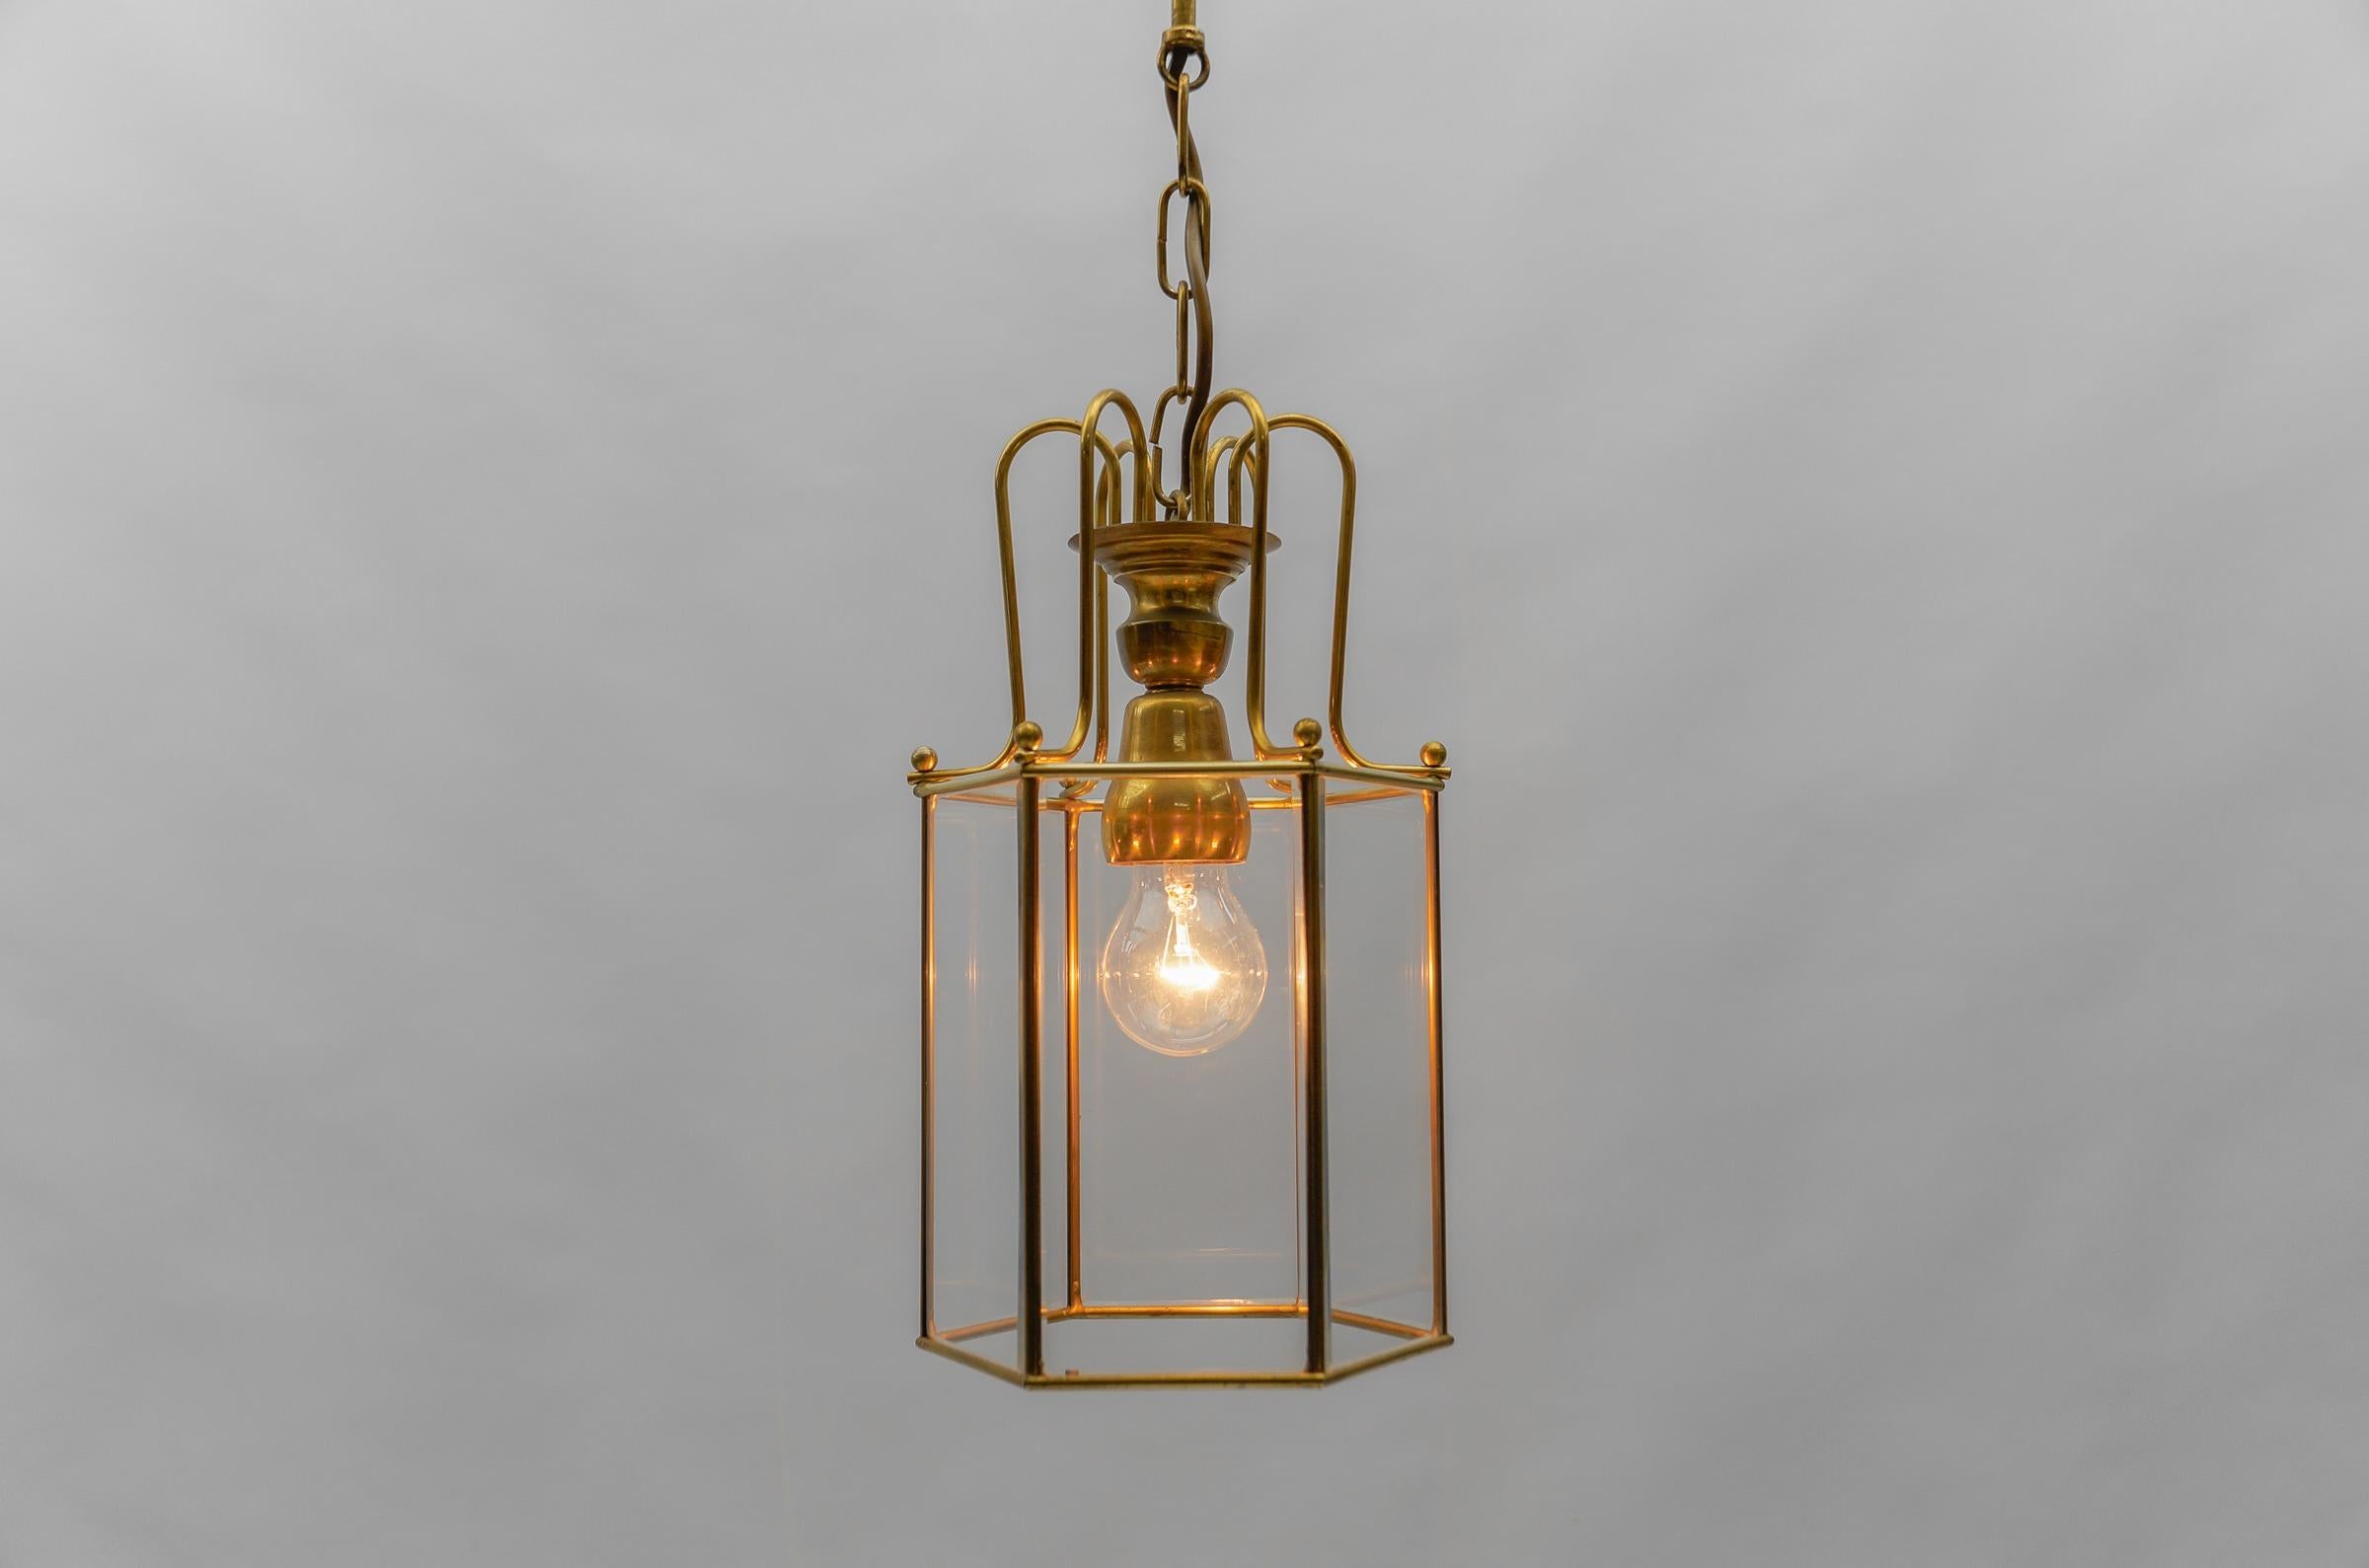 Mid-20th Century Art Deco Cut Glass Pendant Lamp in Brass, 1940s / 1950s For Sale